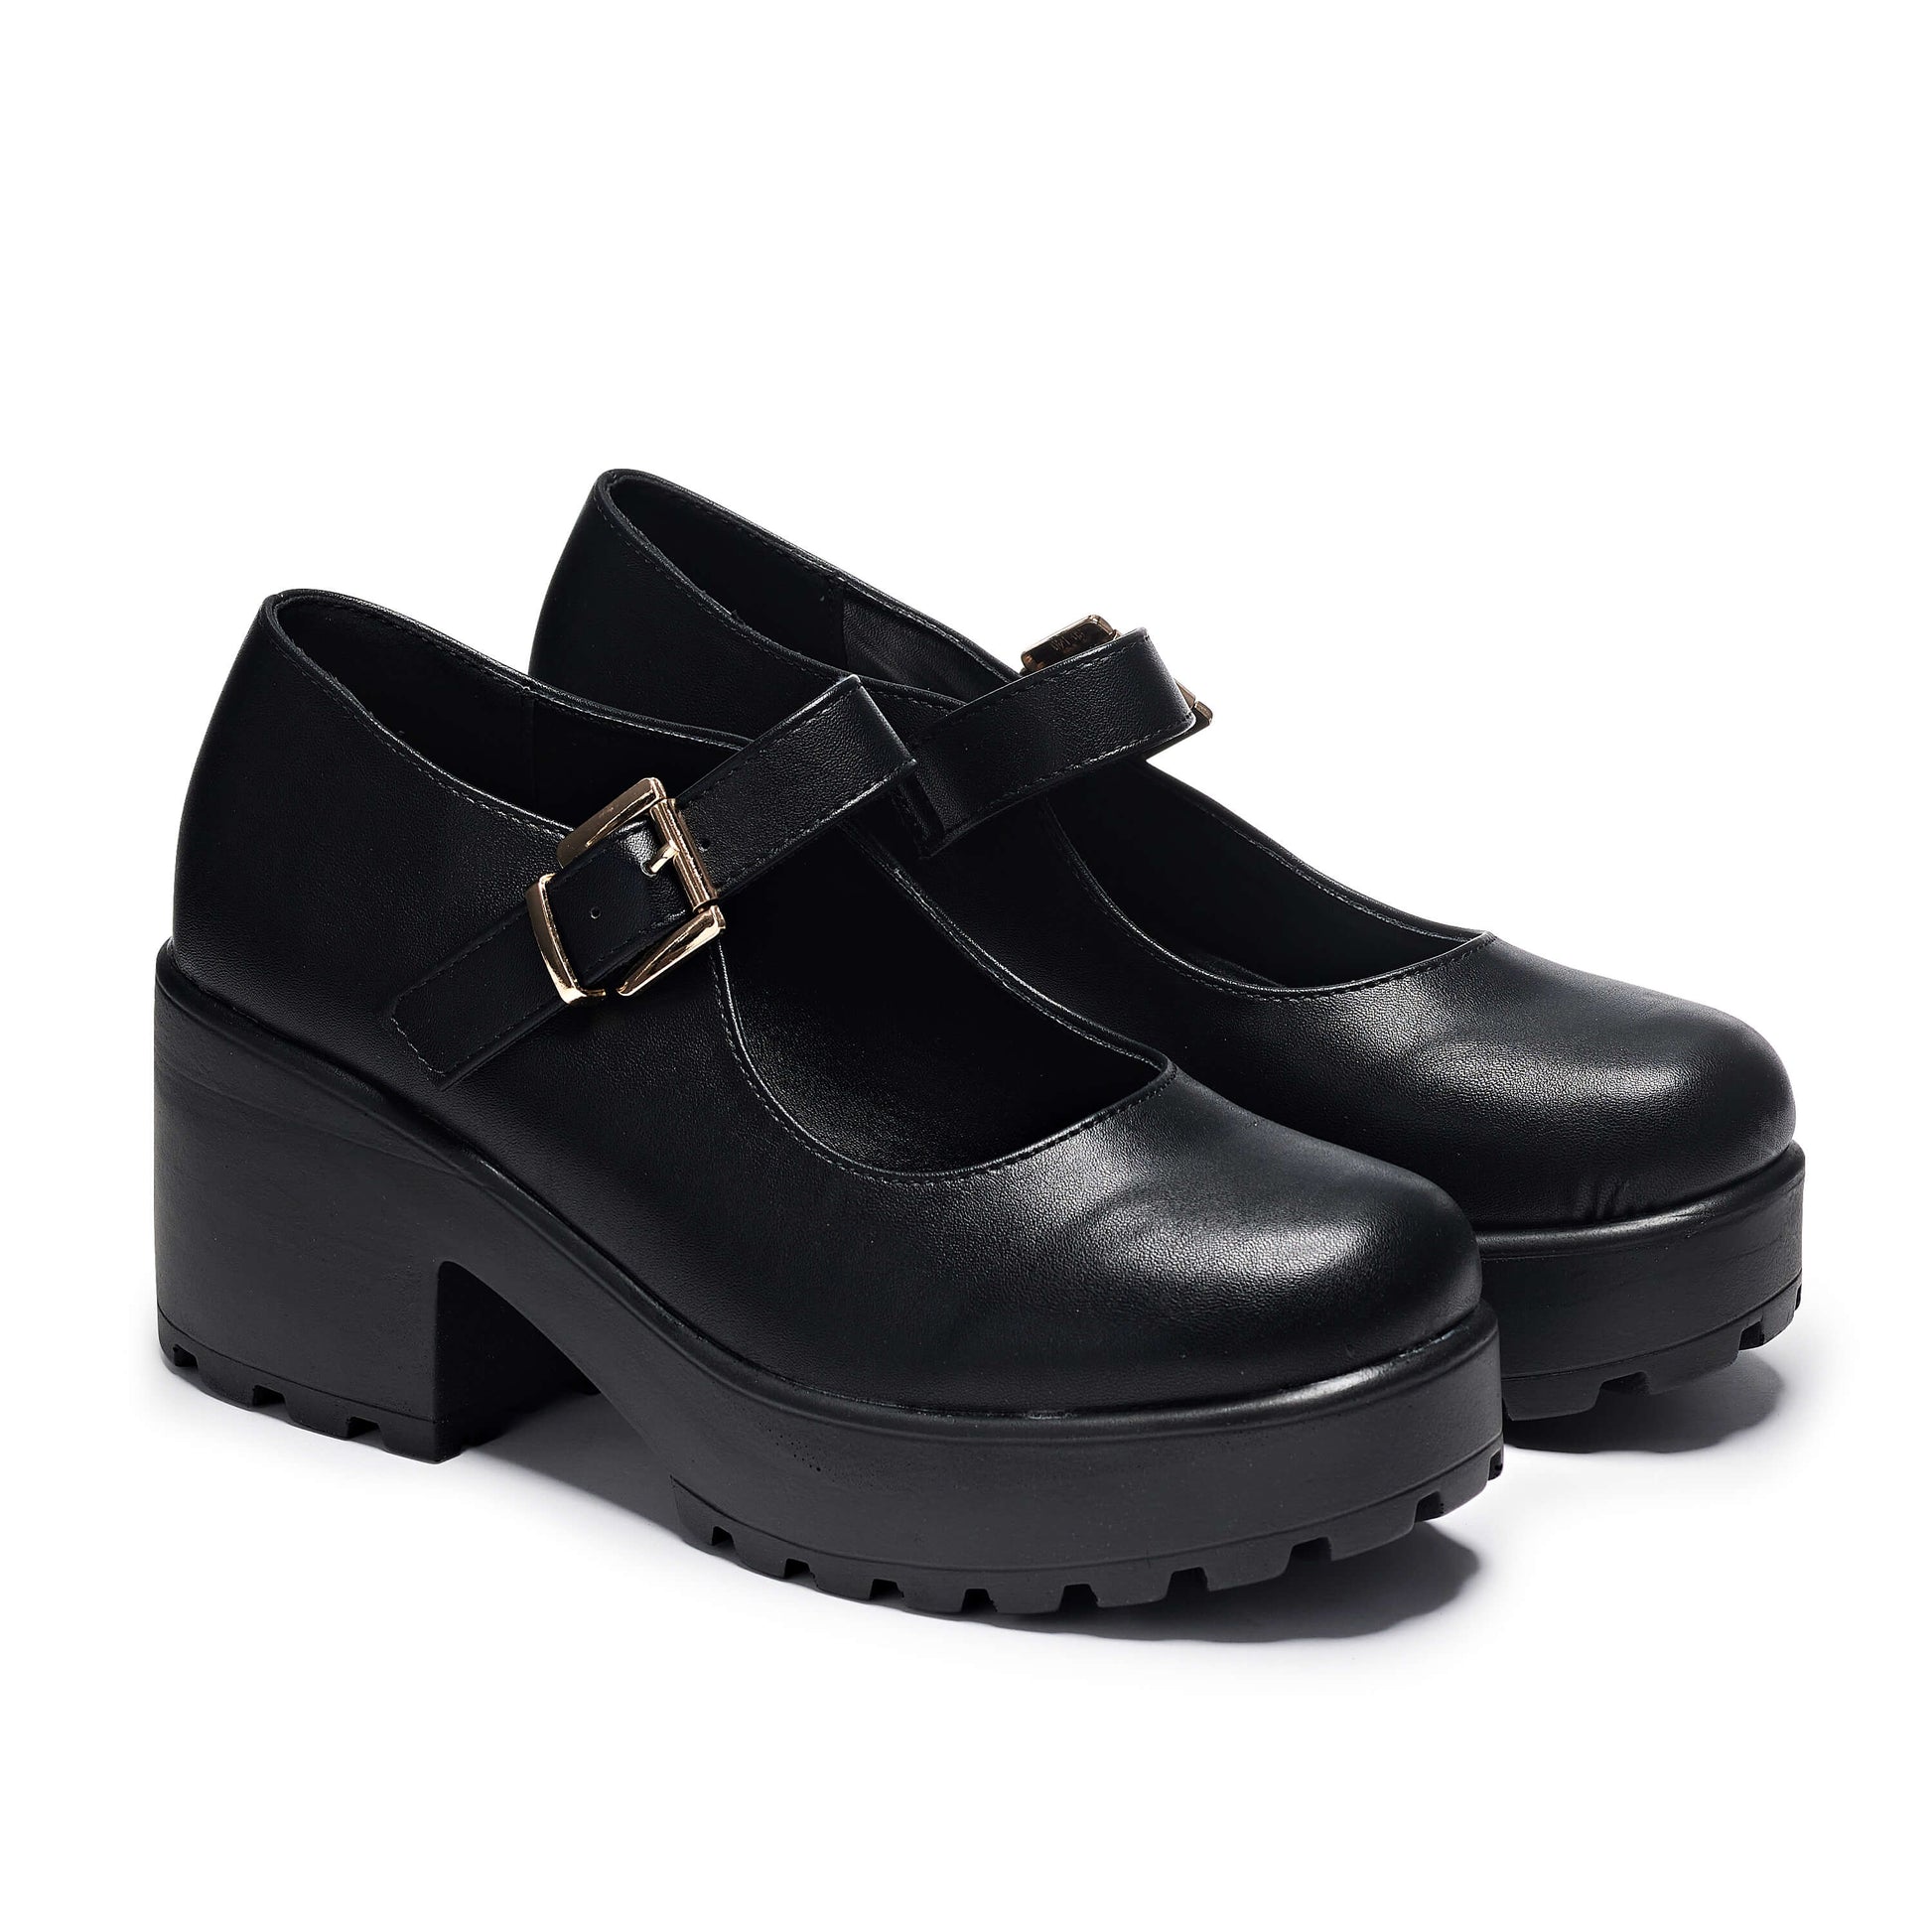 Tira WIDE FIT Mary Jane Shoes 'Faux Leather Edition' - Mary Janes - KOI Footwear - Black - Three-Quarter View